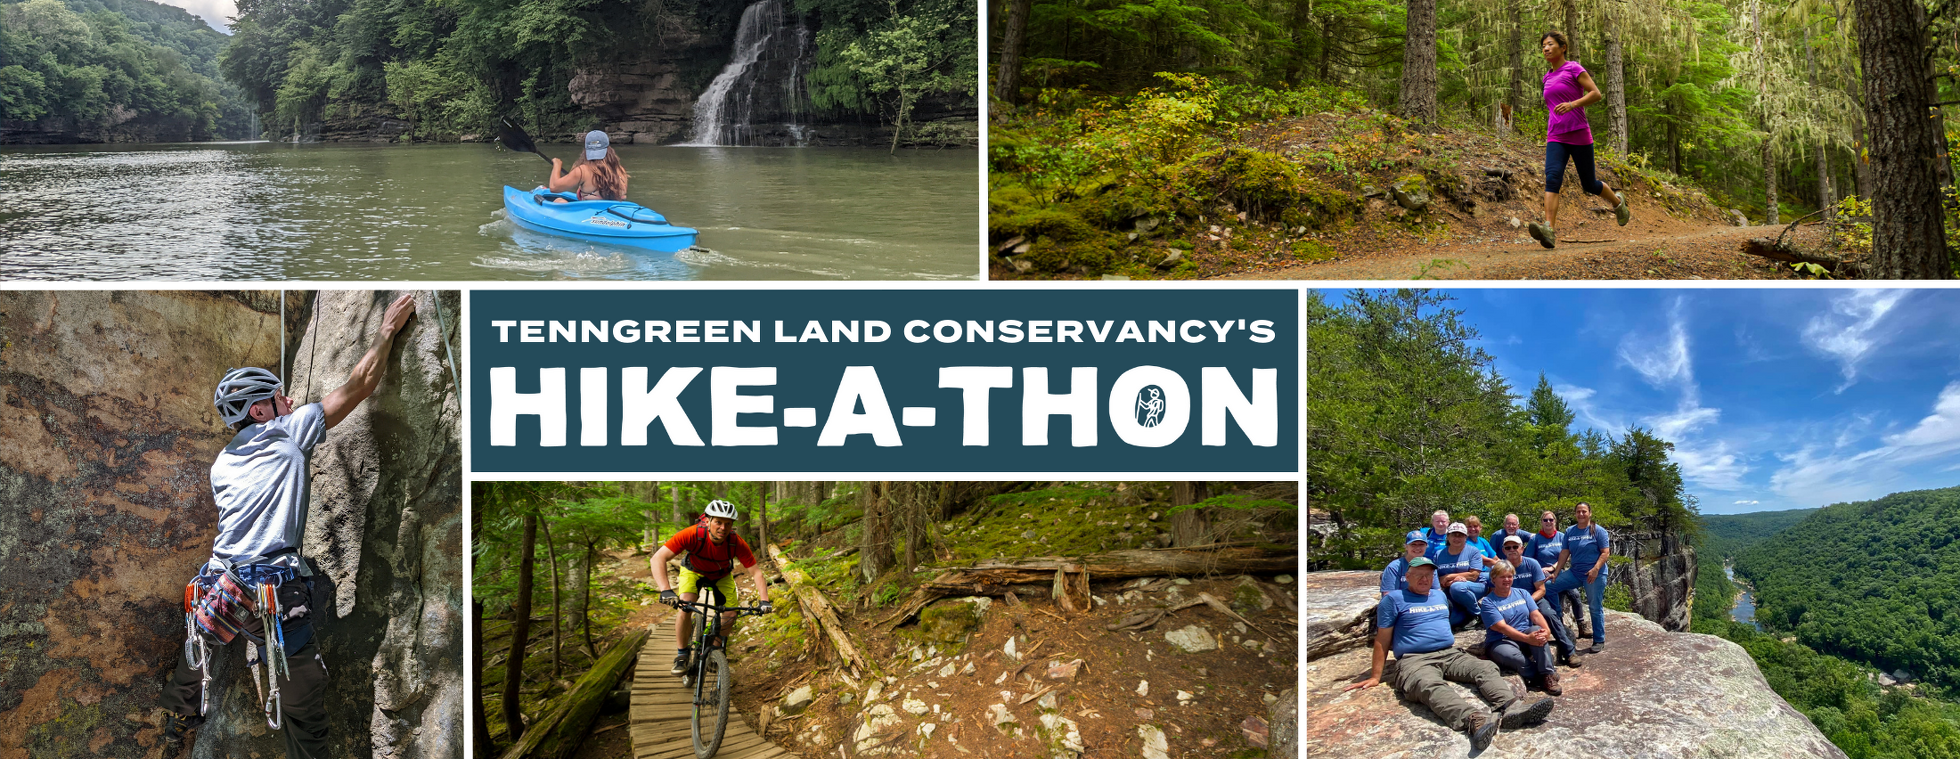 TennGreen Land Conservancy's Hike-a-Thon